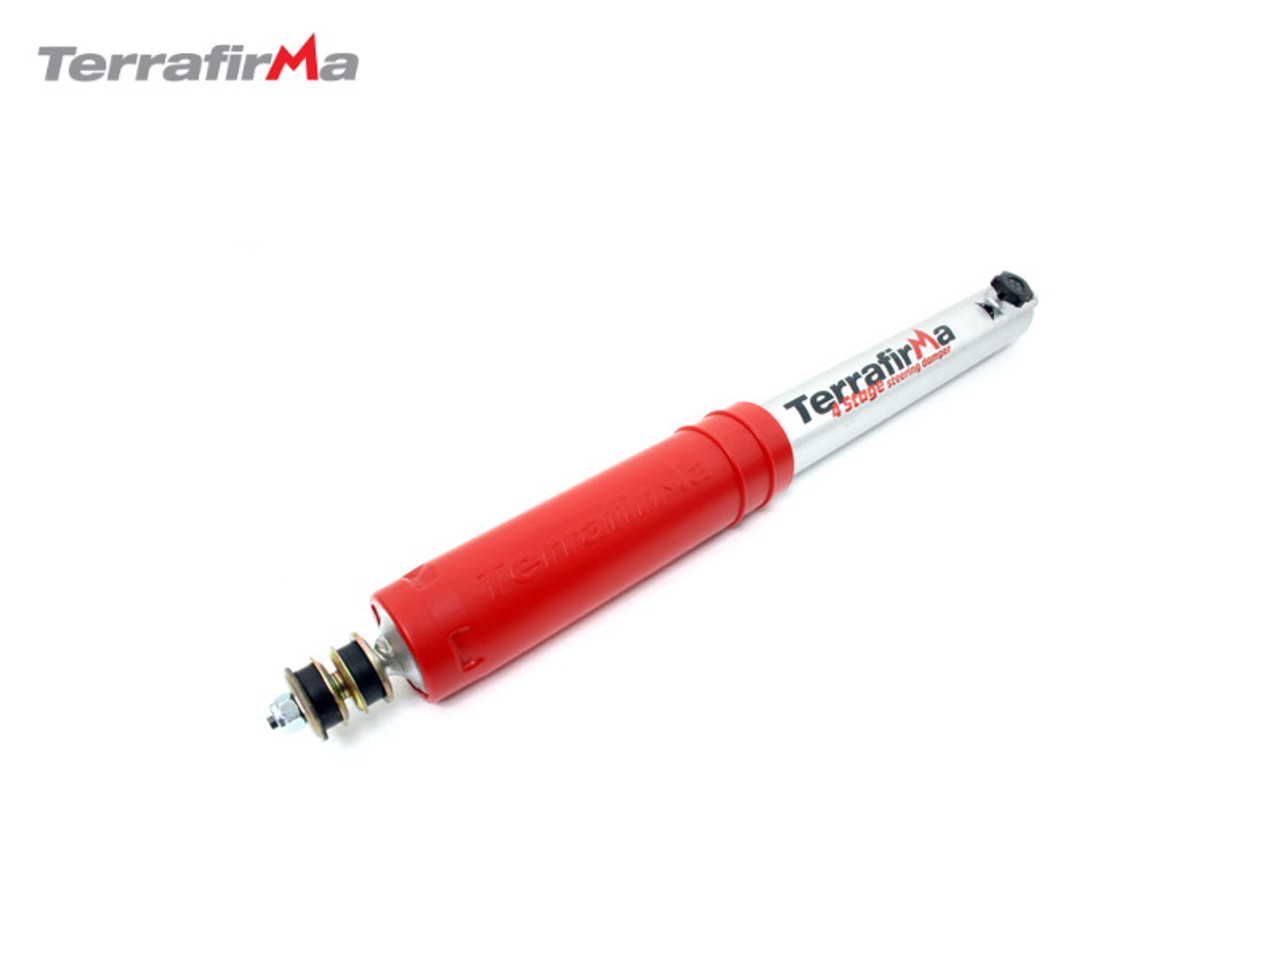 Terrafirma 4 Stage Adjustable Steering Damper For Defender, Discovery 1 and Range Rover Classic - TF833